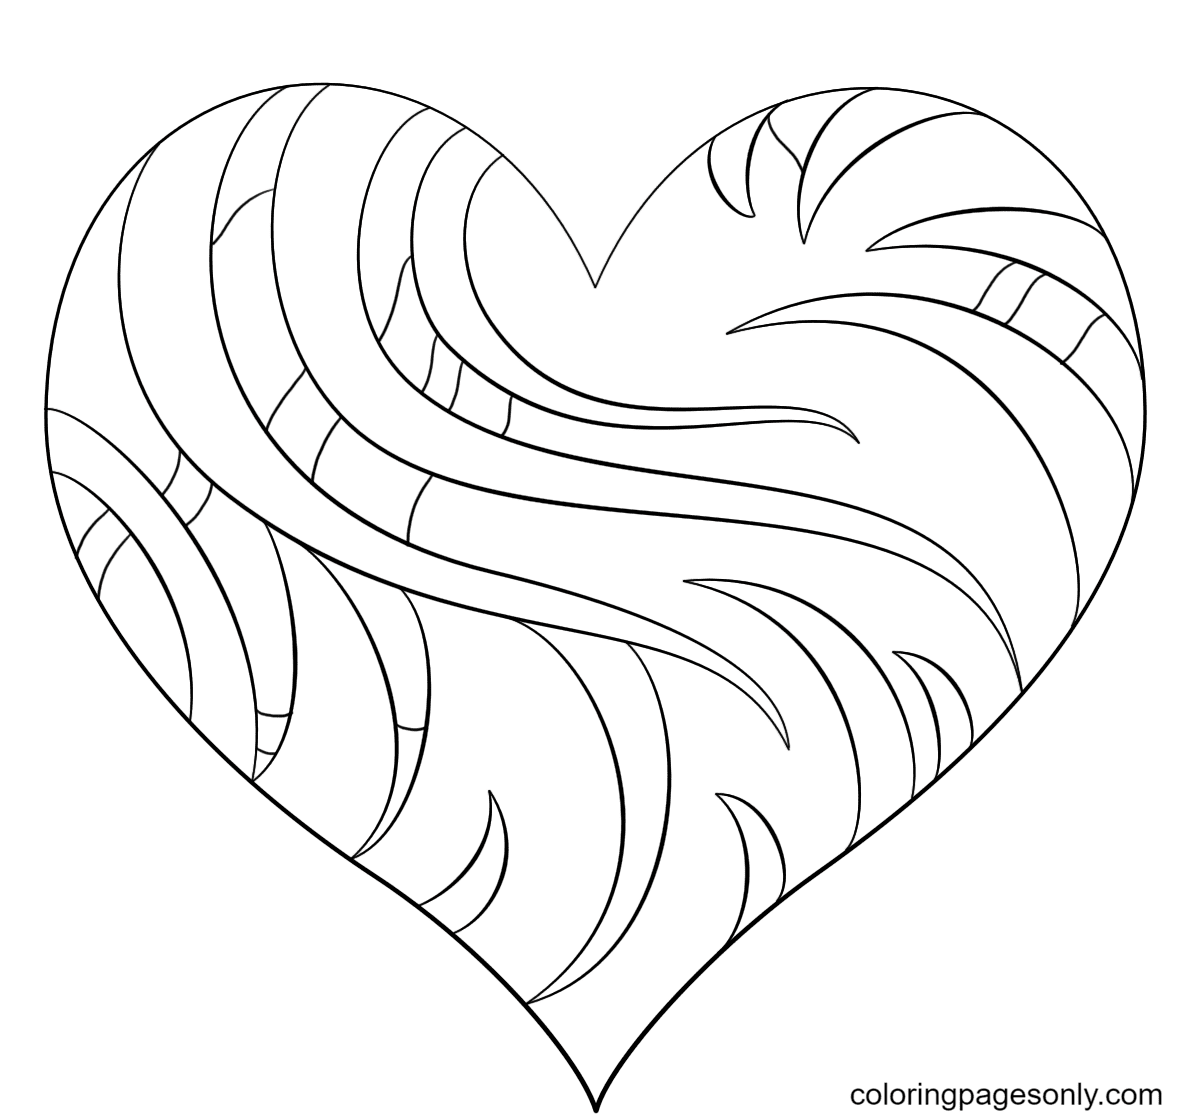 Intricate Heart Coloring Page